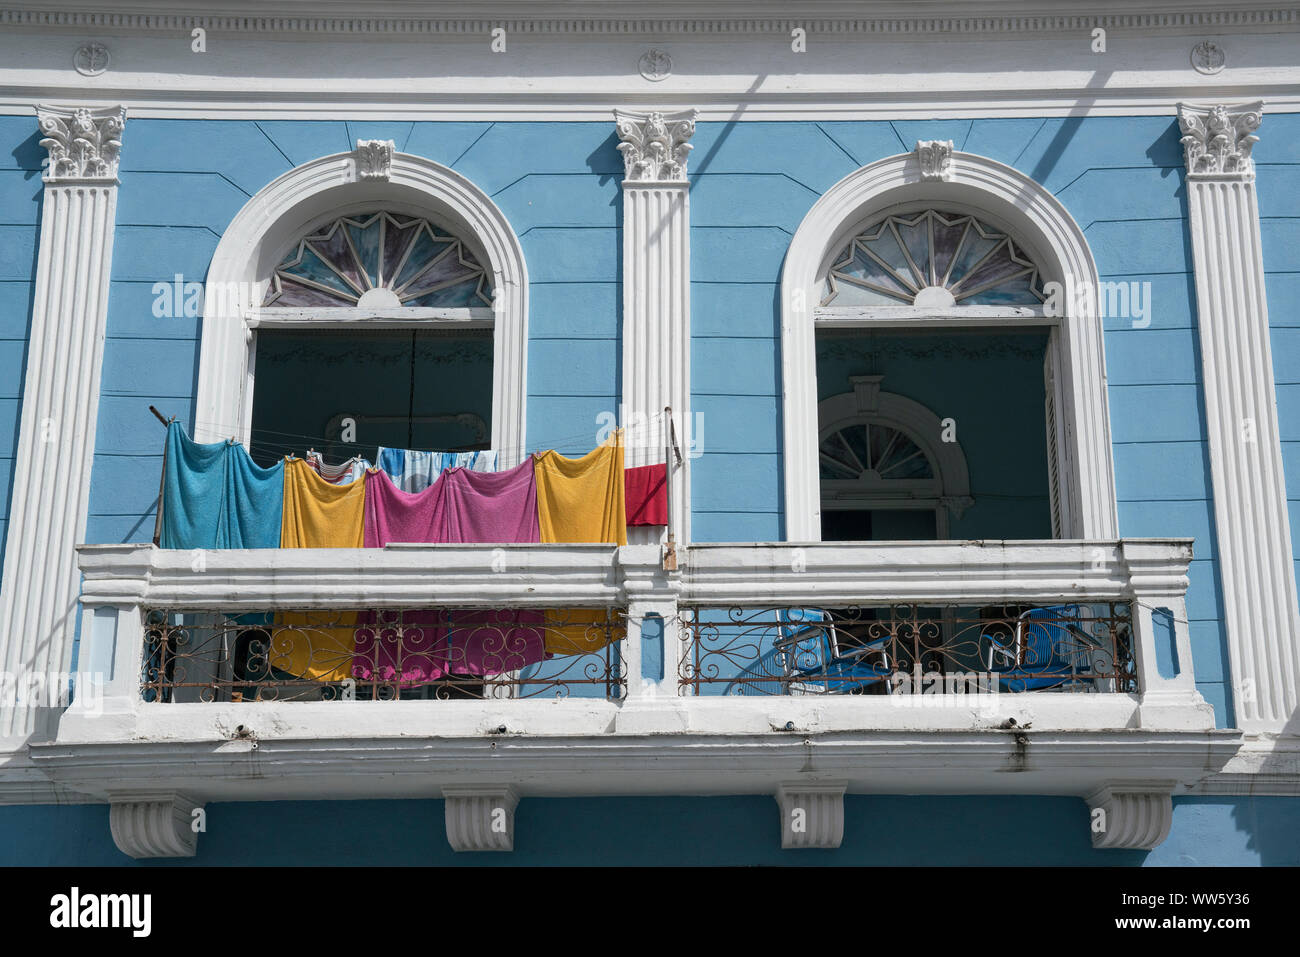 Laundry drying on a balcony of a blue house in colonial style, Santiago de Cuba Stock Photo